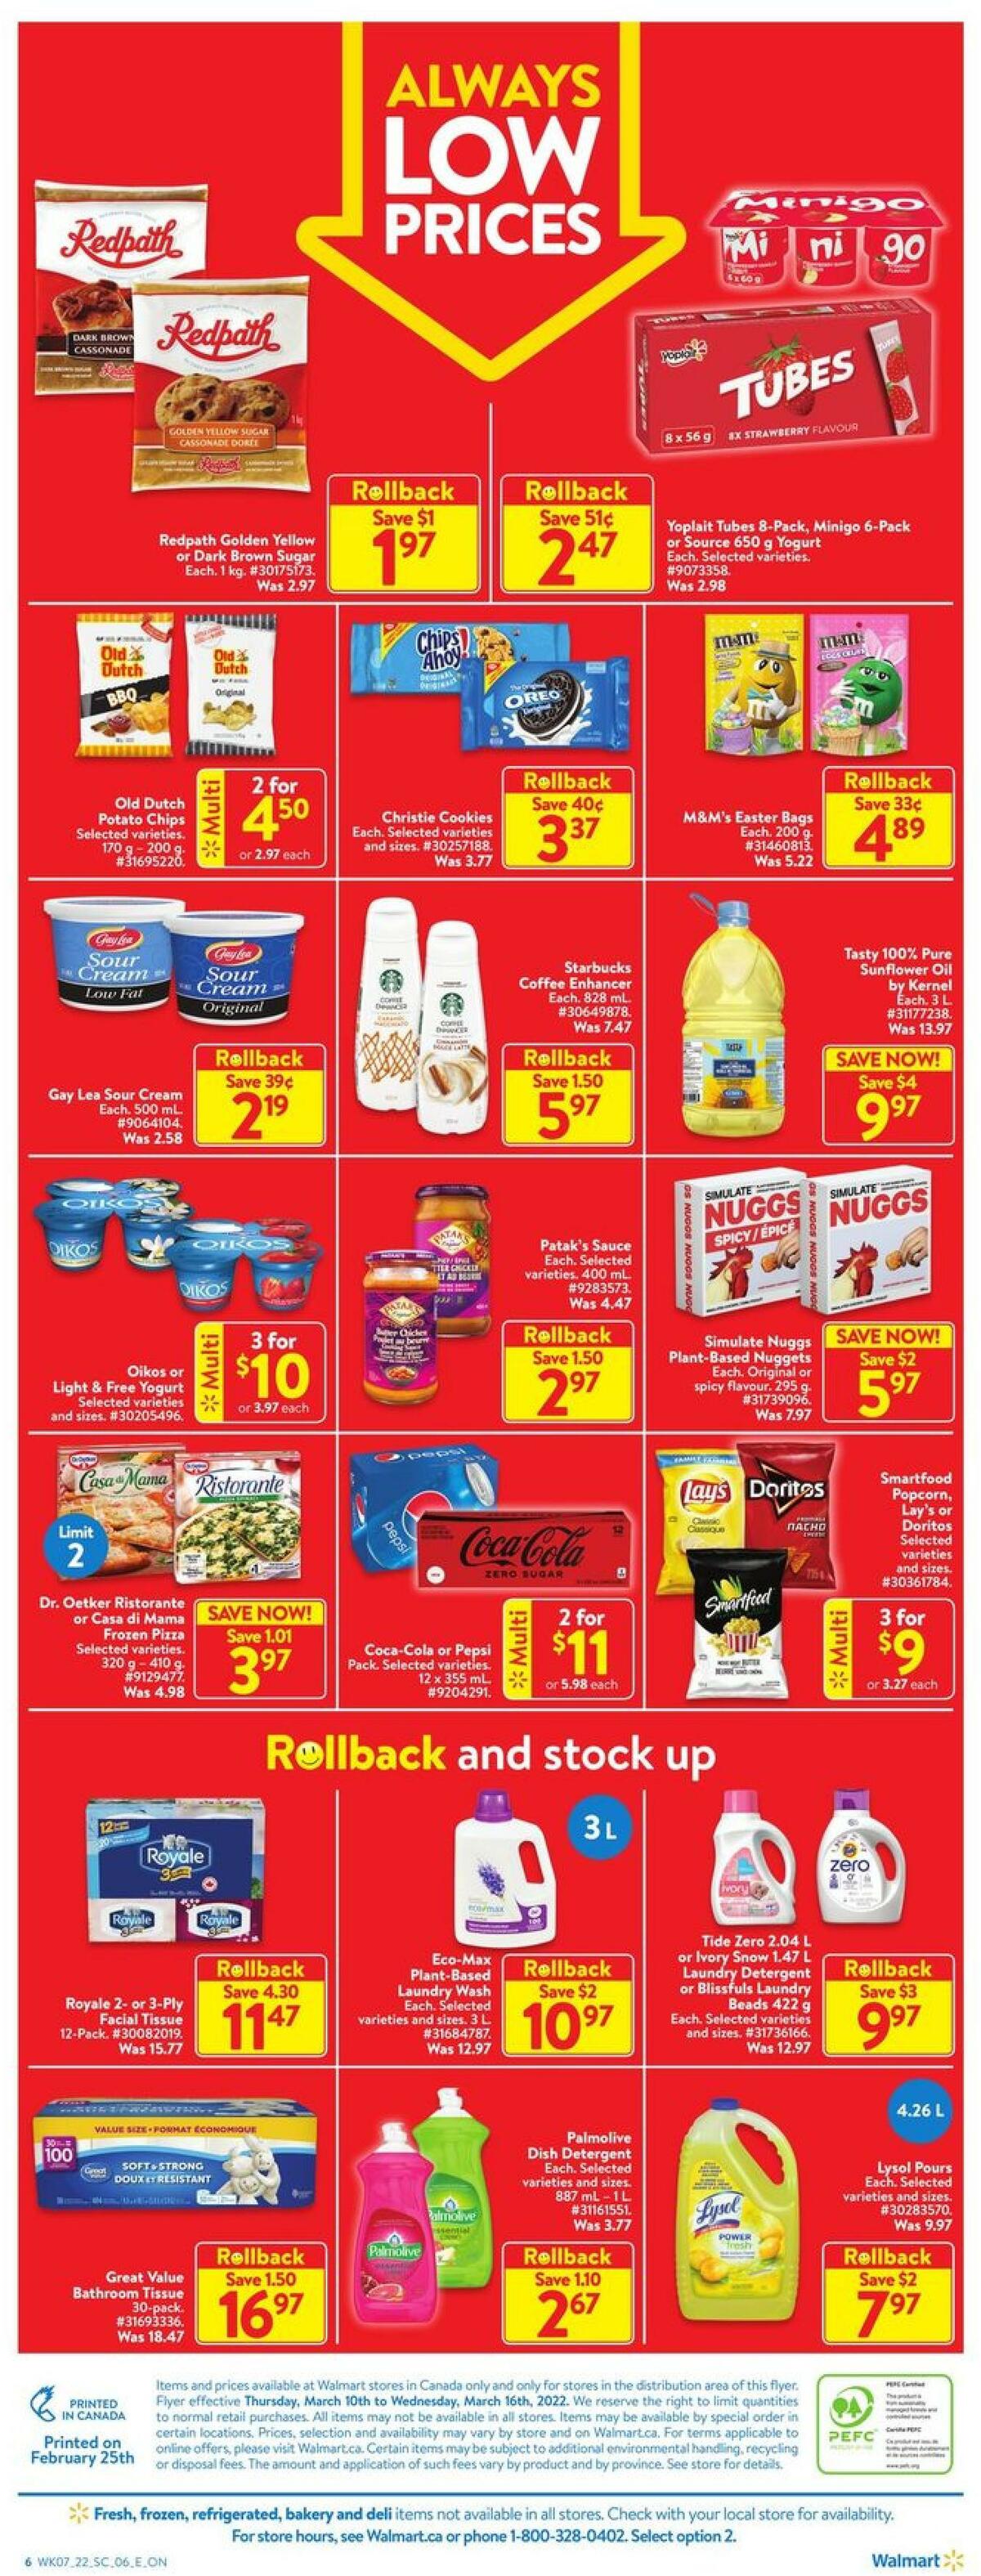 Walmart Flyer from March 10